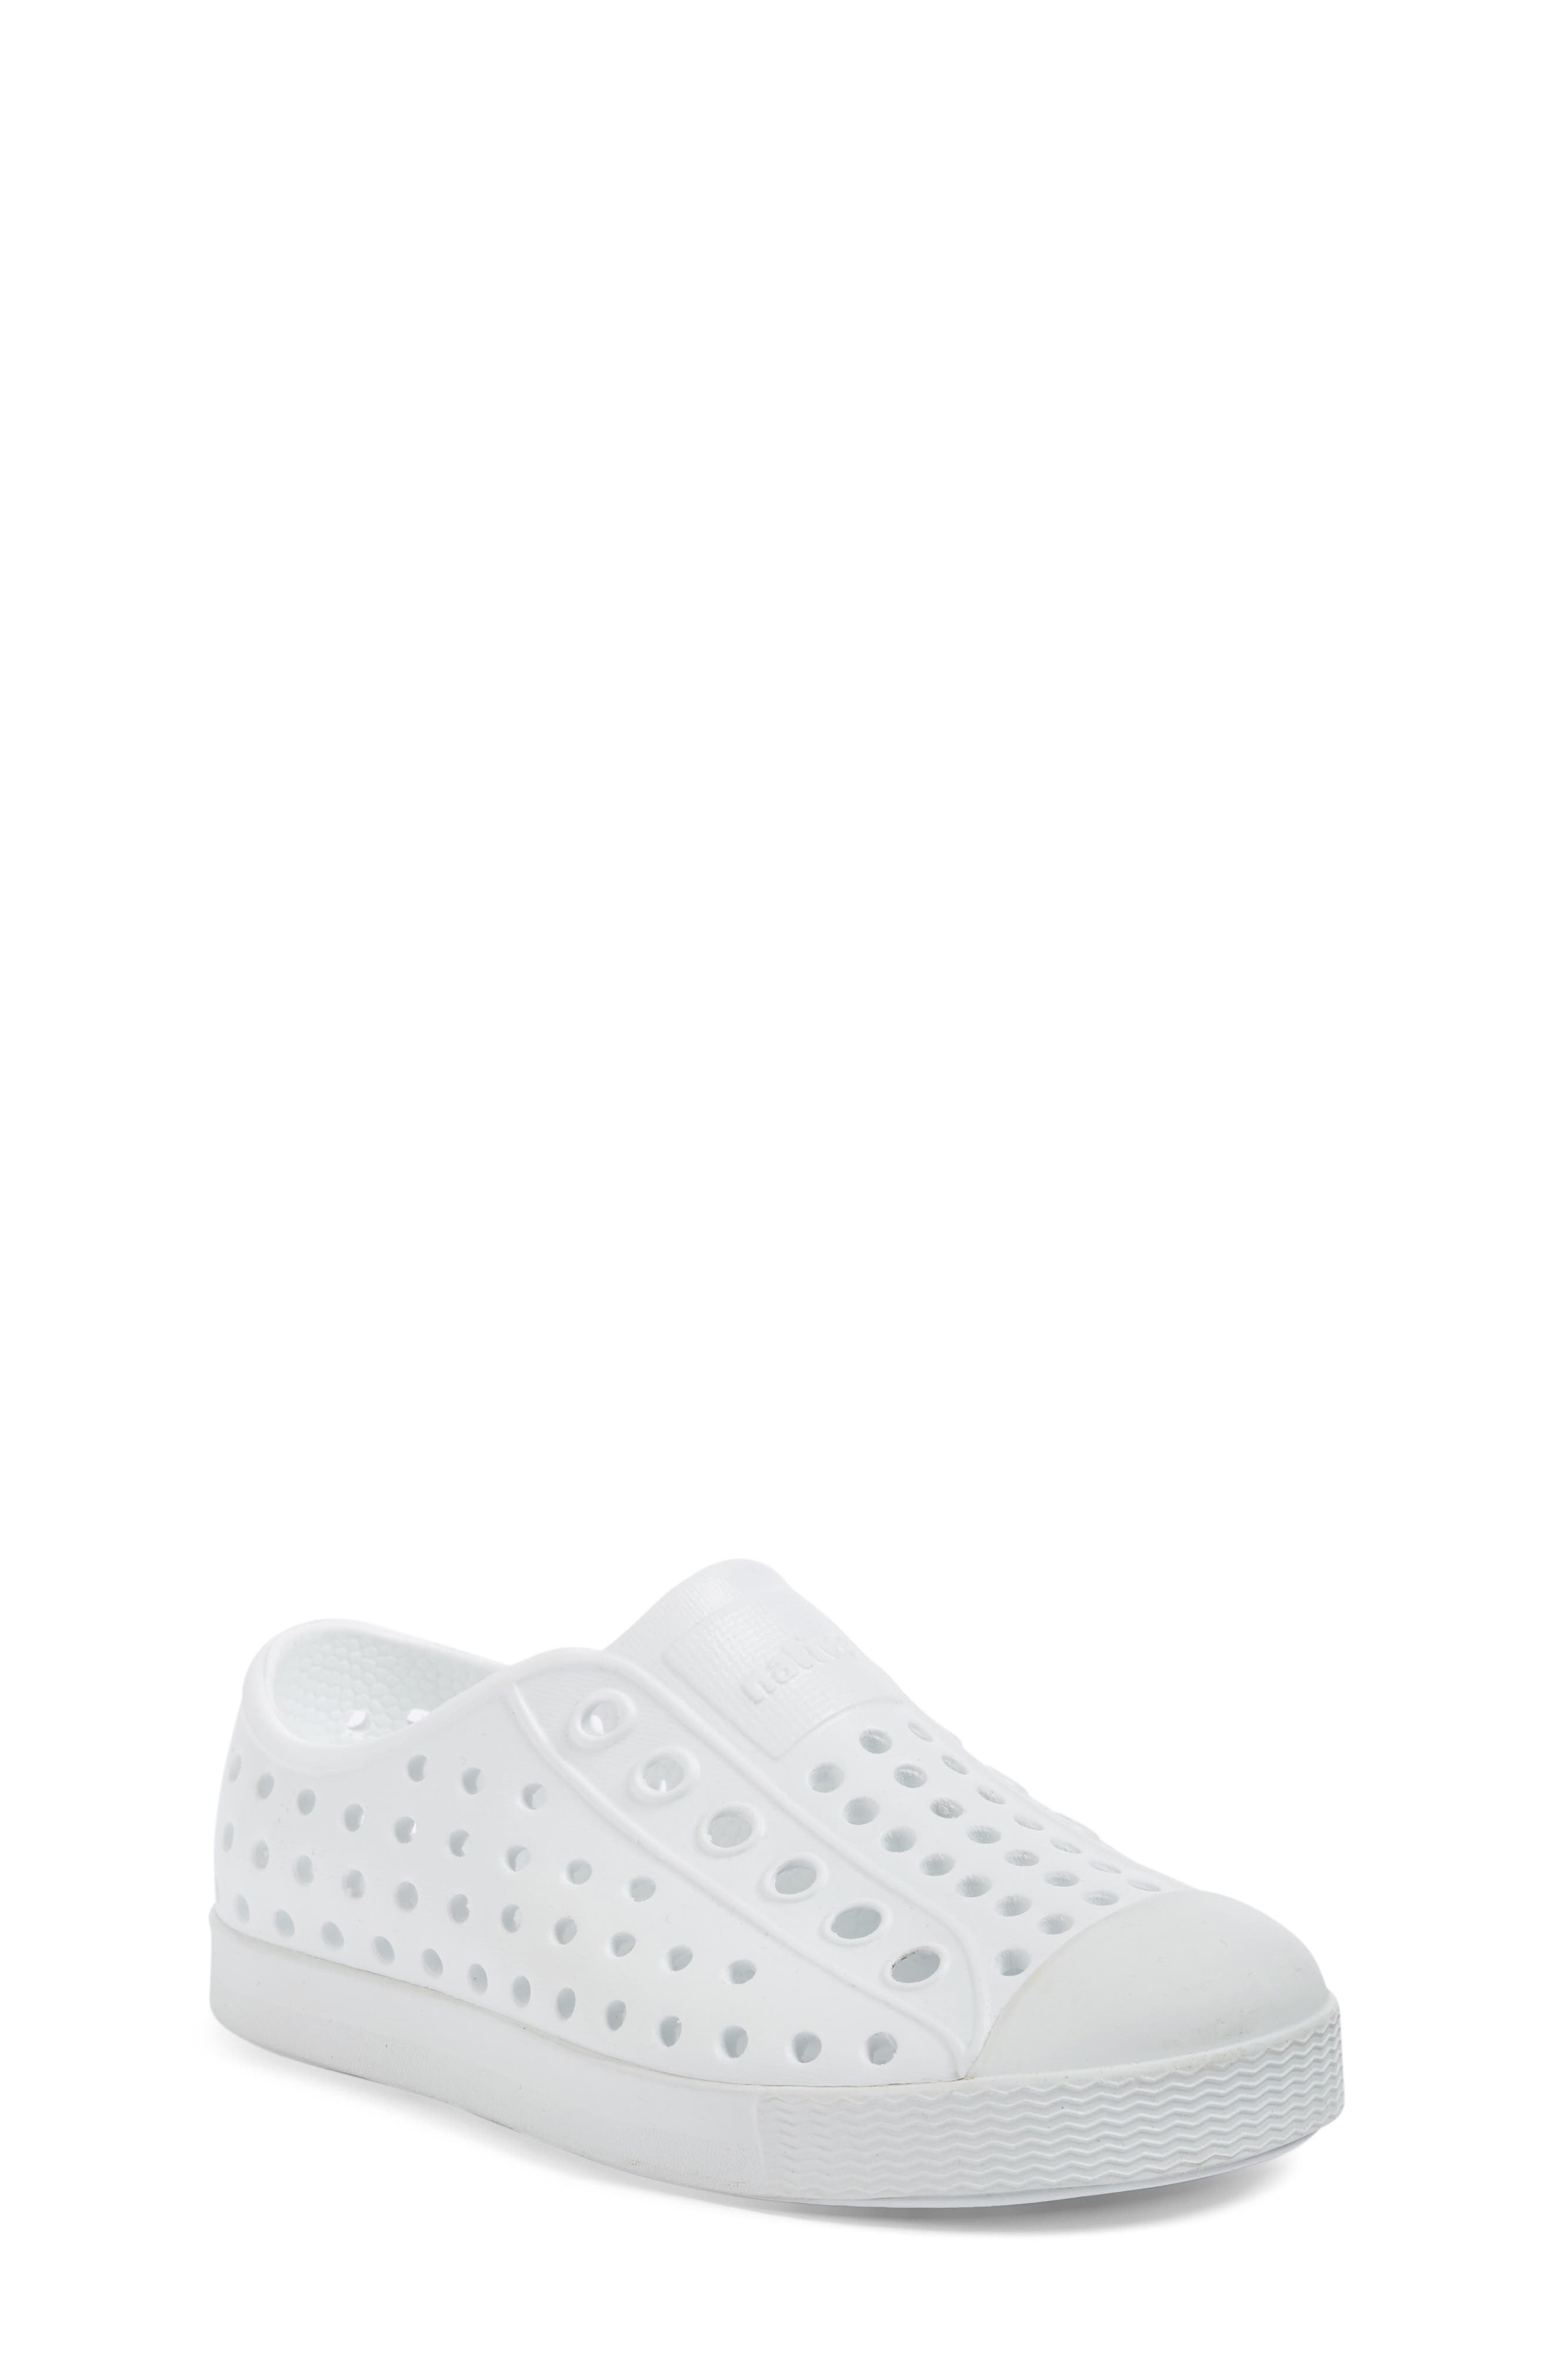 kids white athletic shoes